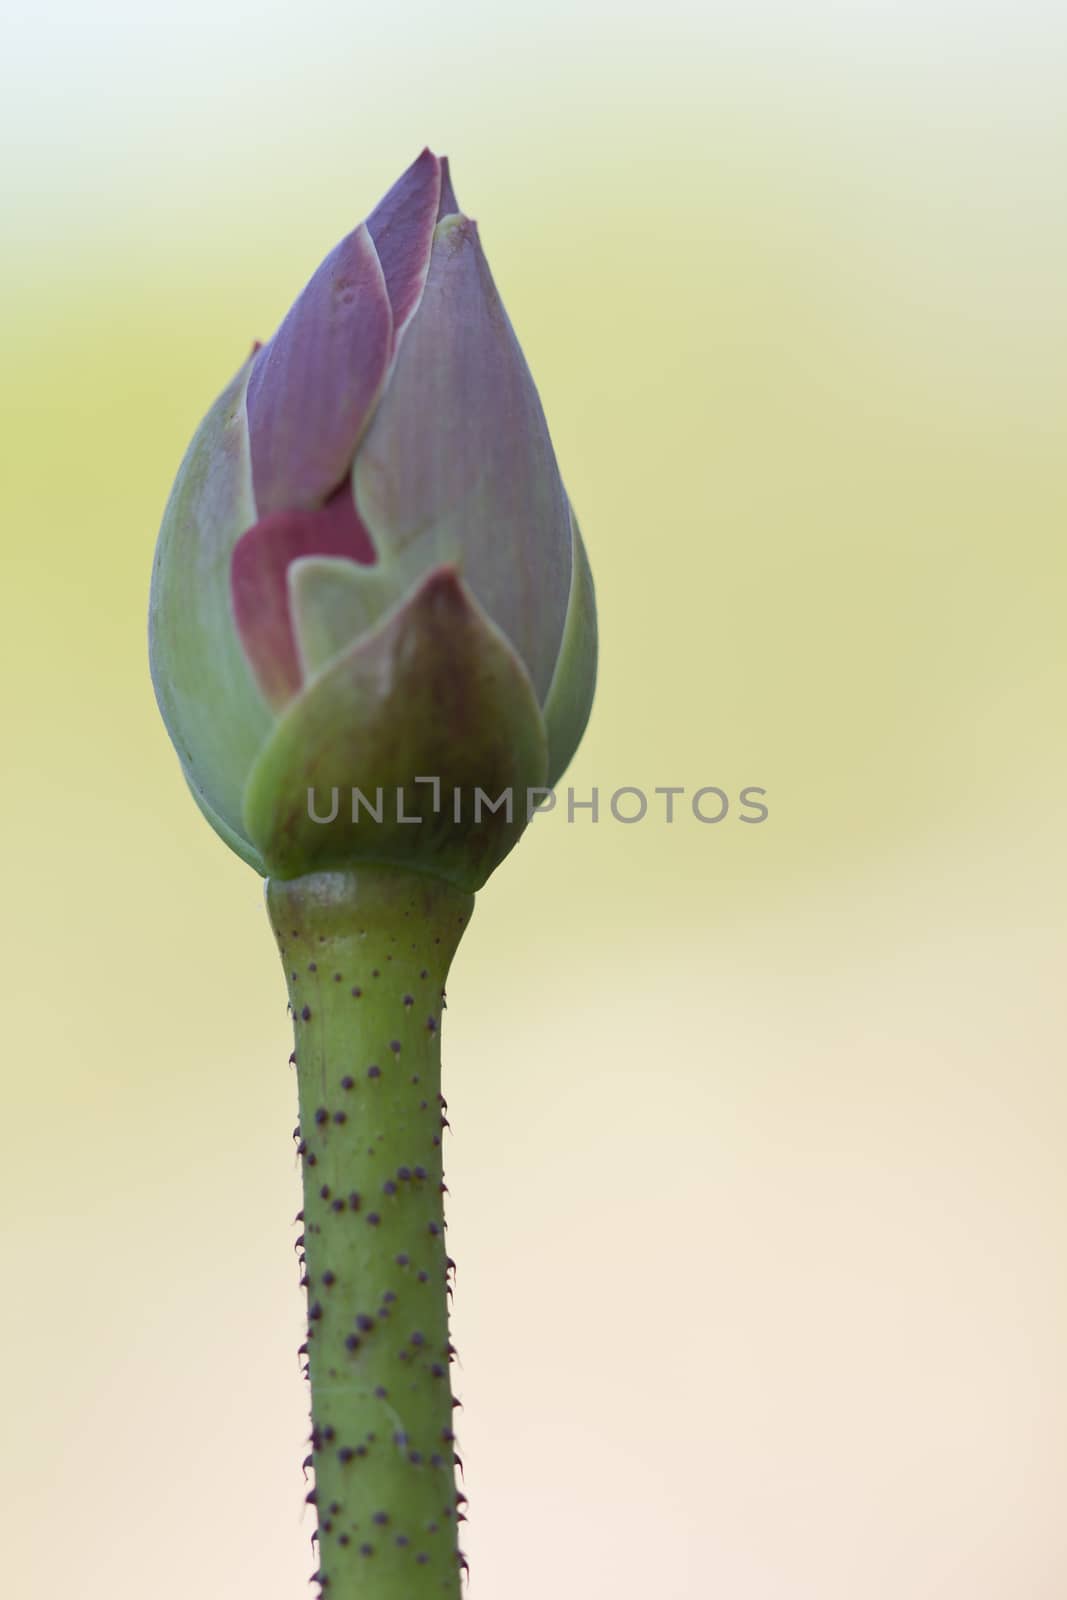 Image of a lotus blossom on a background